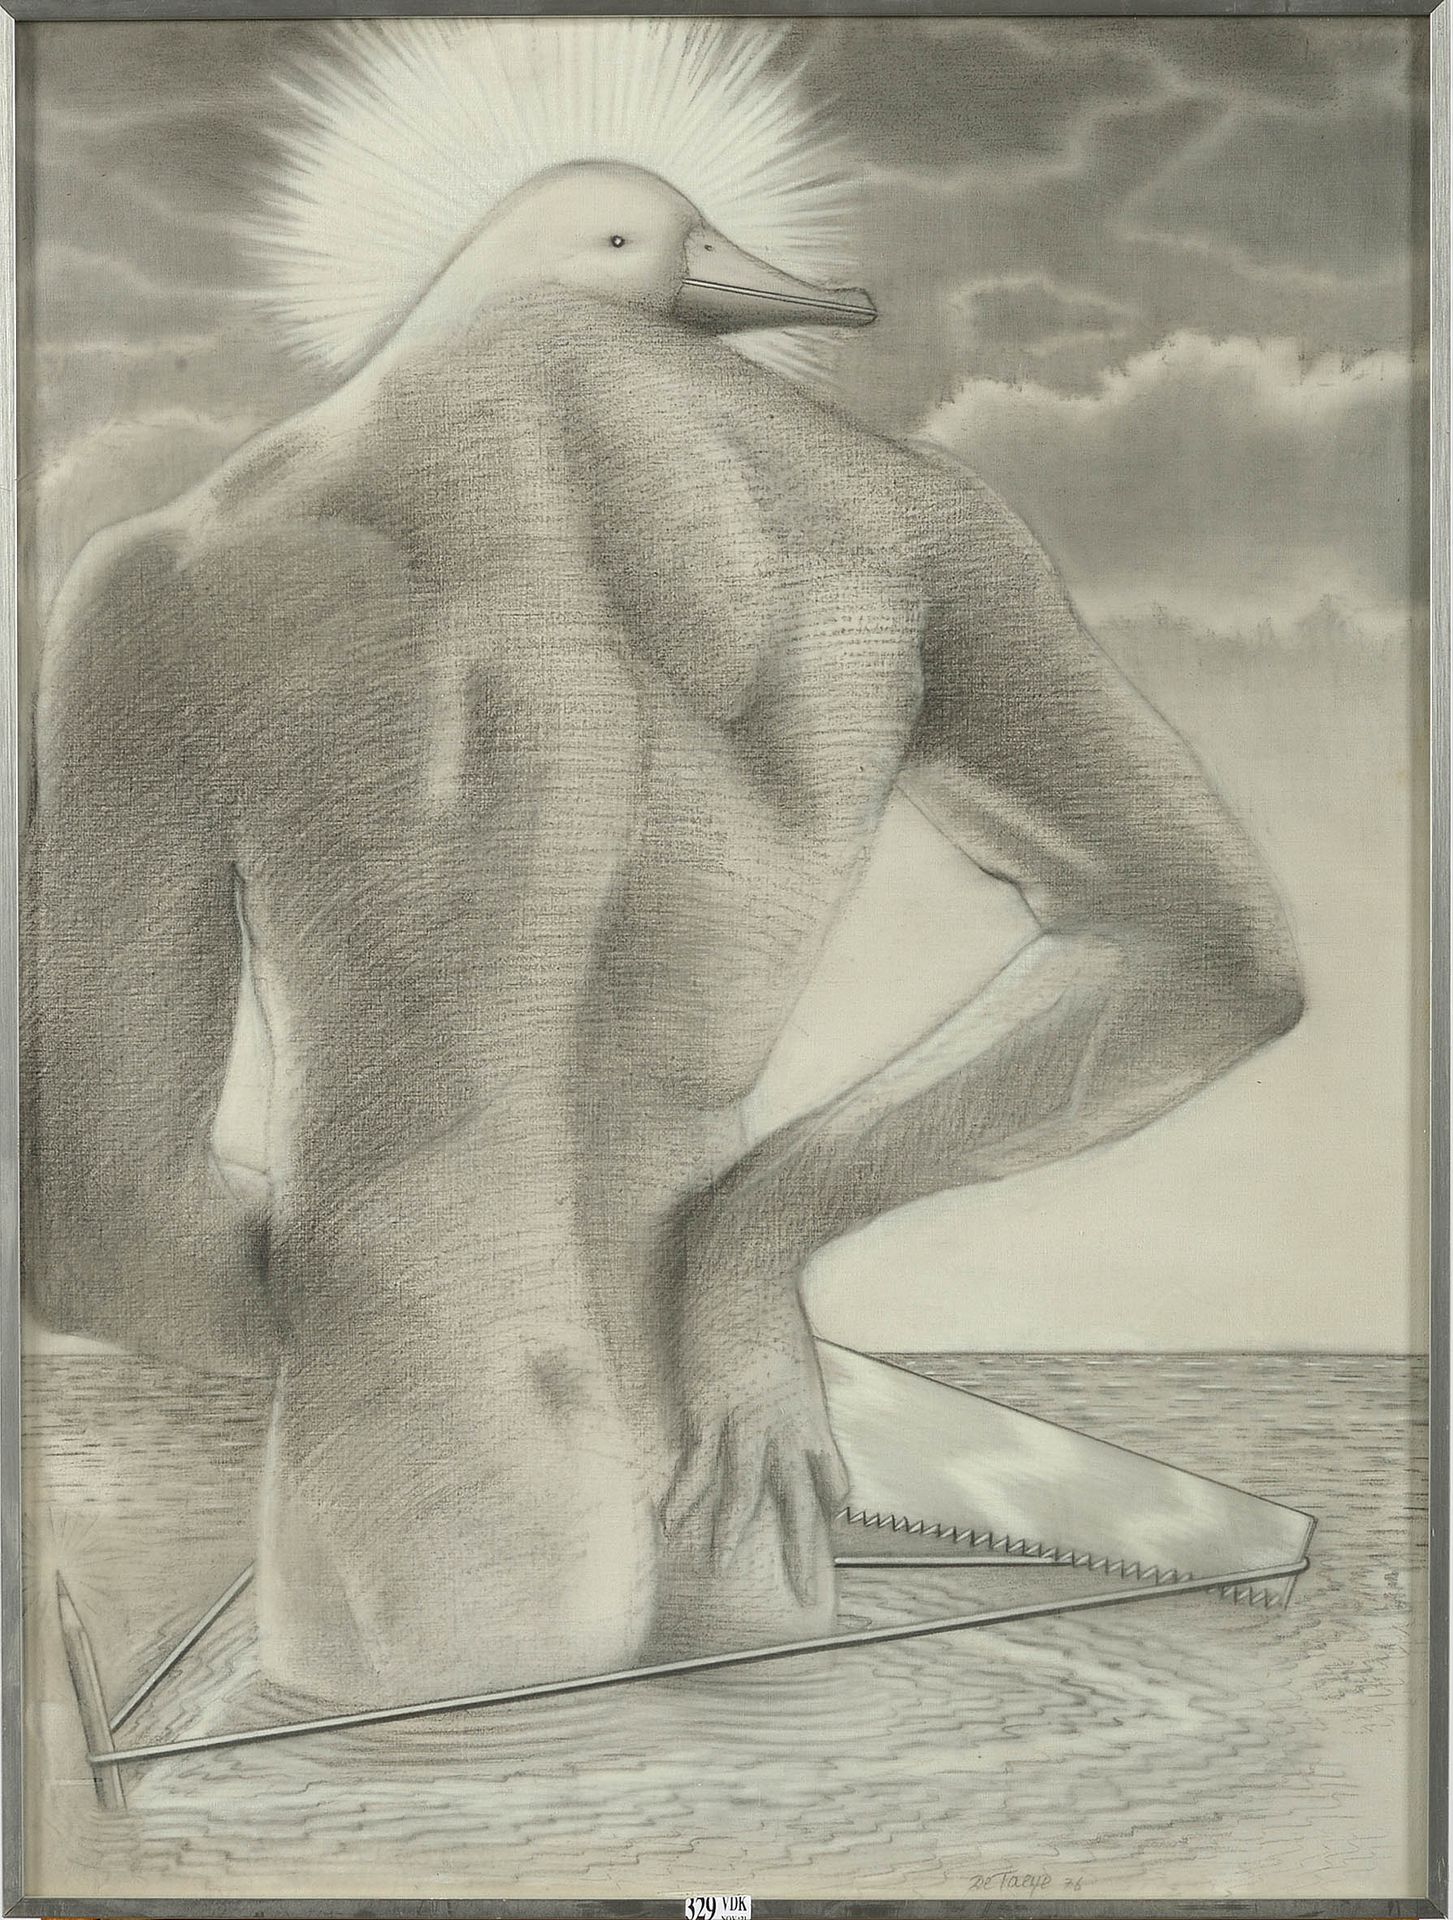 DE TAEYE Camille (1938 - 2013) "The torso" charcoal on canvas. Signed lower righ&hellip;